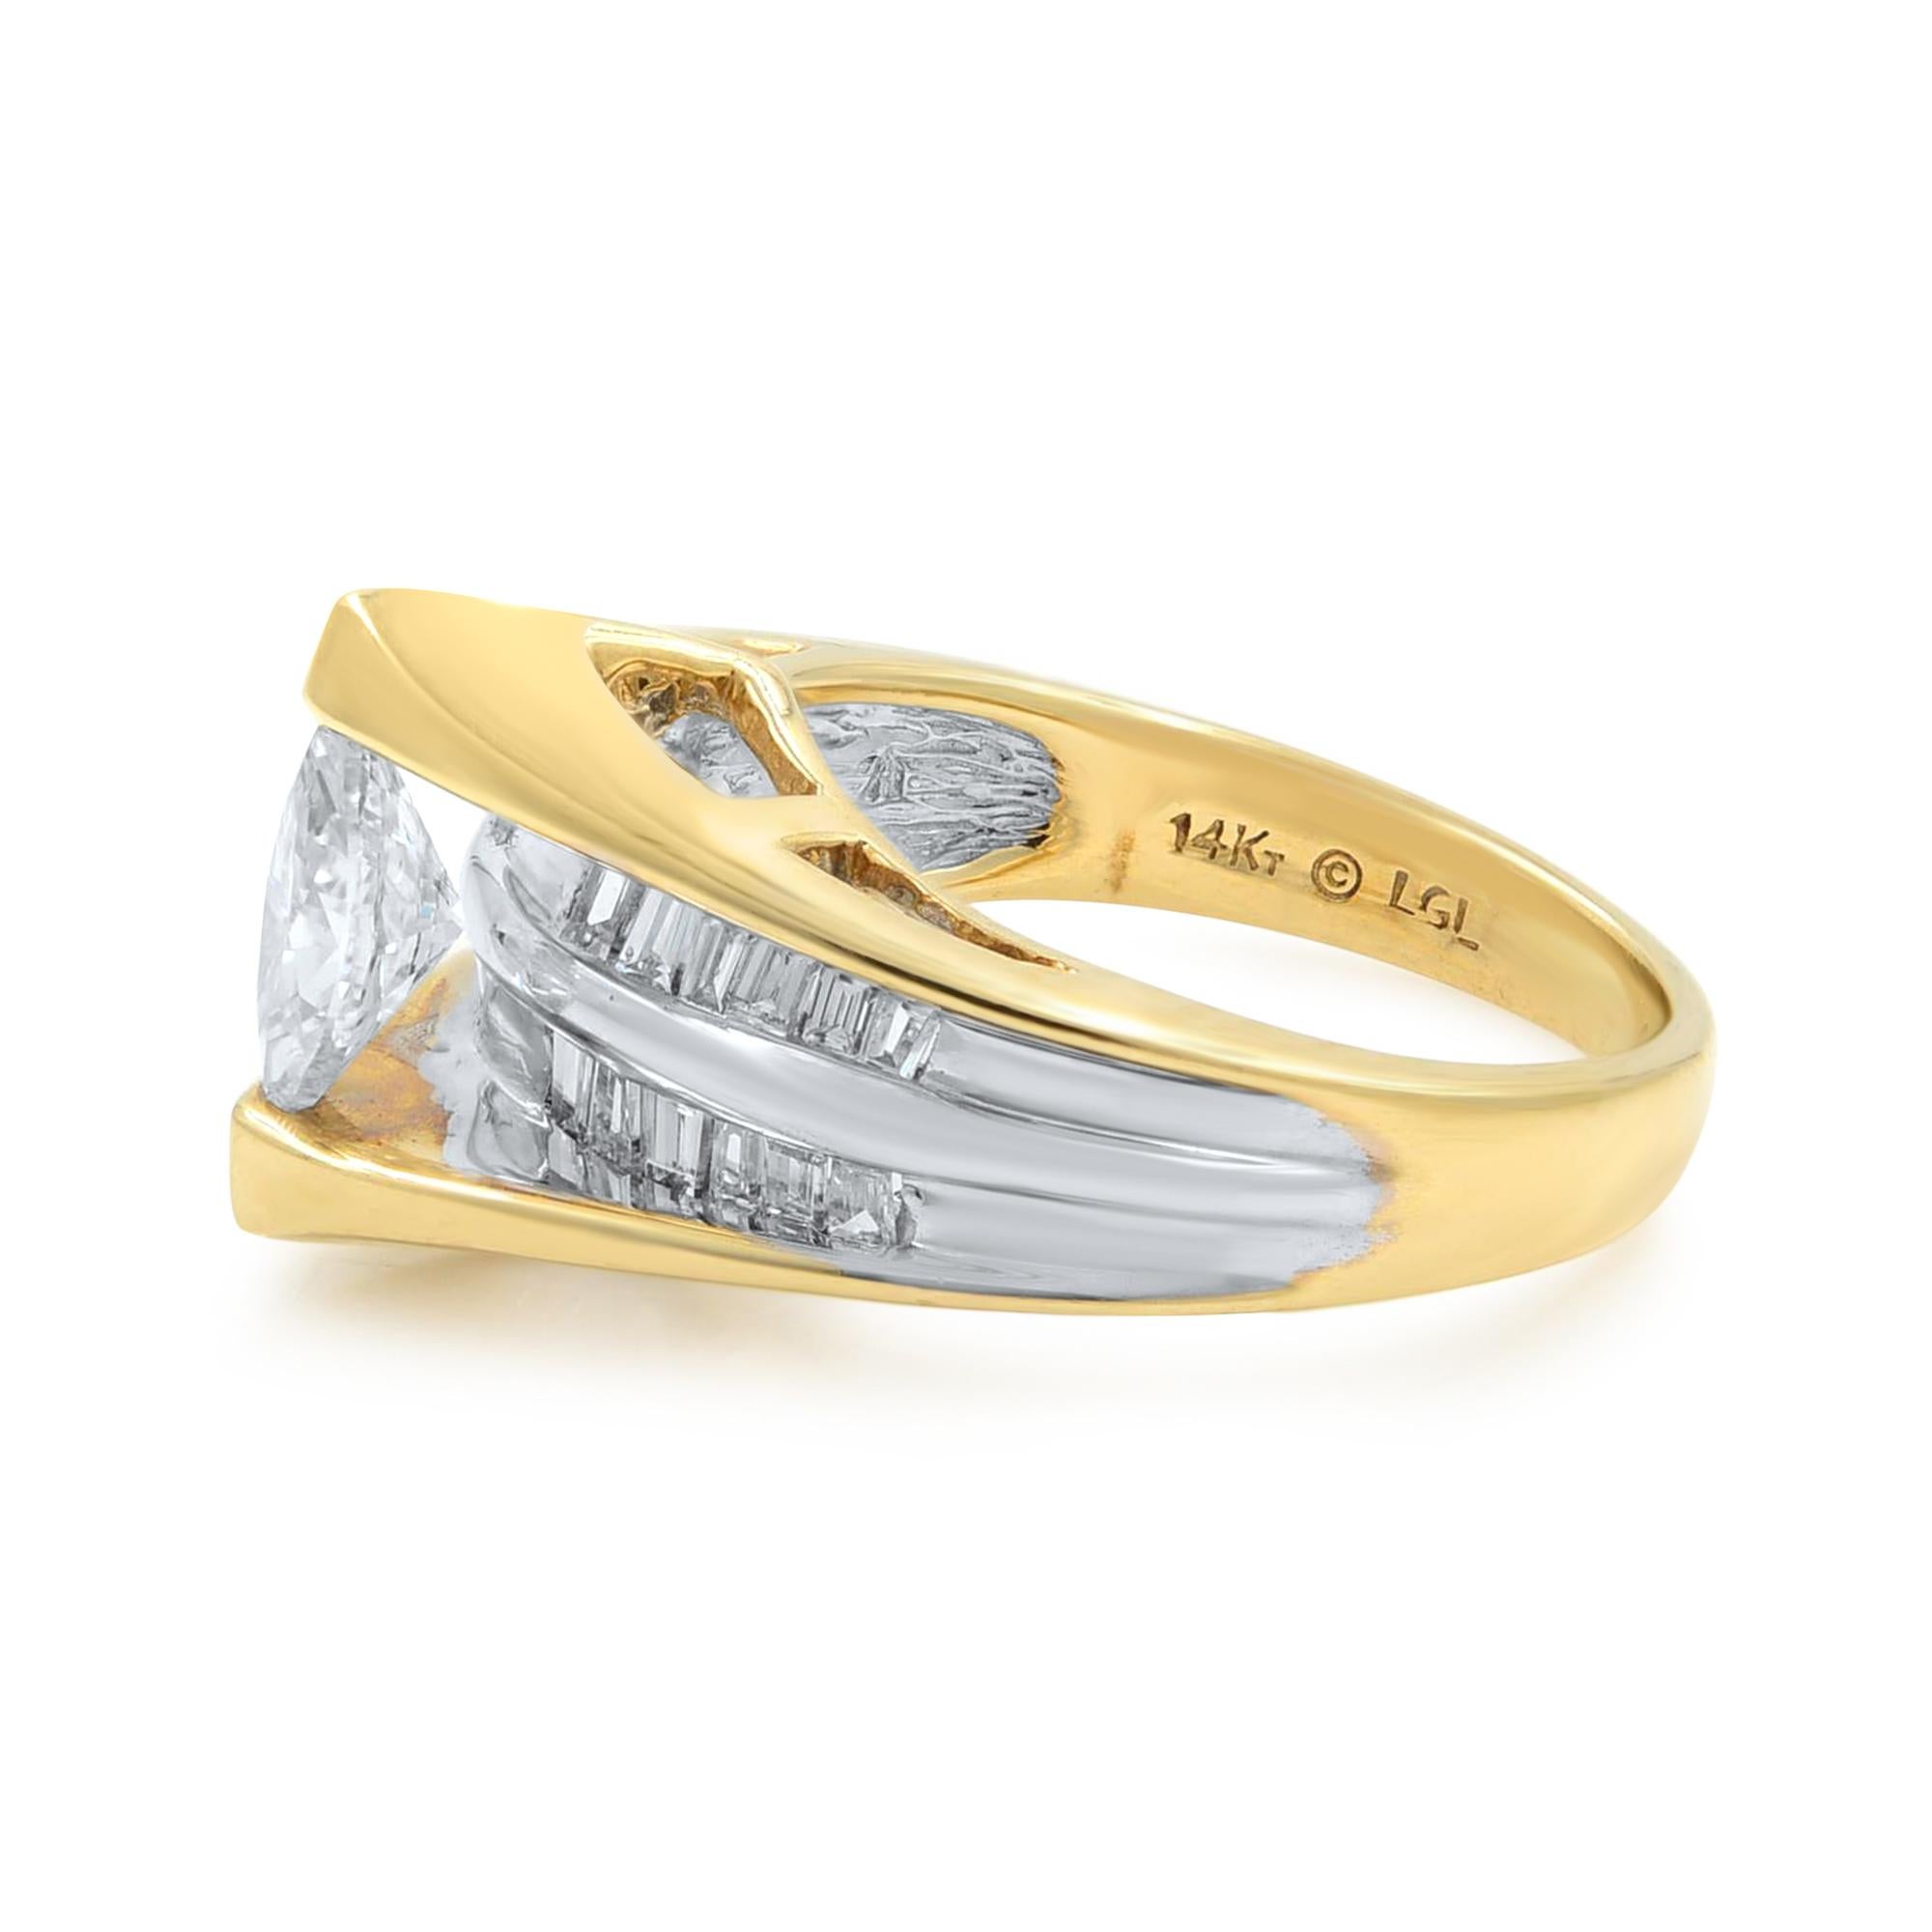 This beautiful two tone ring features a marquise cut center diamond weighing 0.82ct. The ring is accented with two lines of baguette cut diamonds behind the main stone, separated with a line of white gold. It is crafted in 14k yellow and white gold.